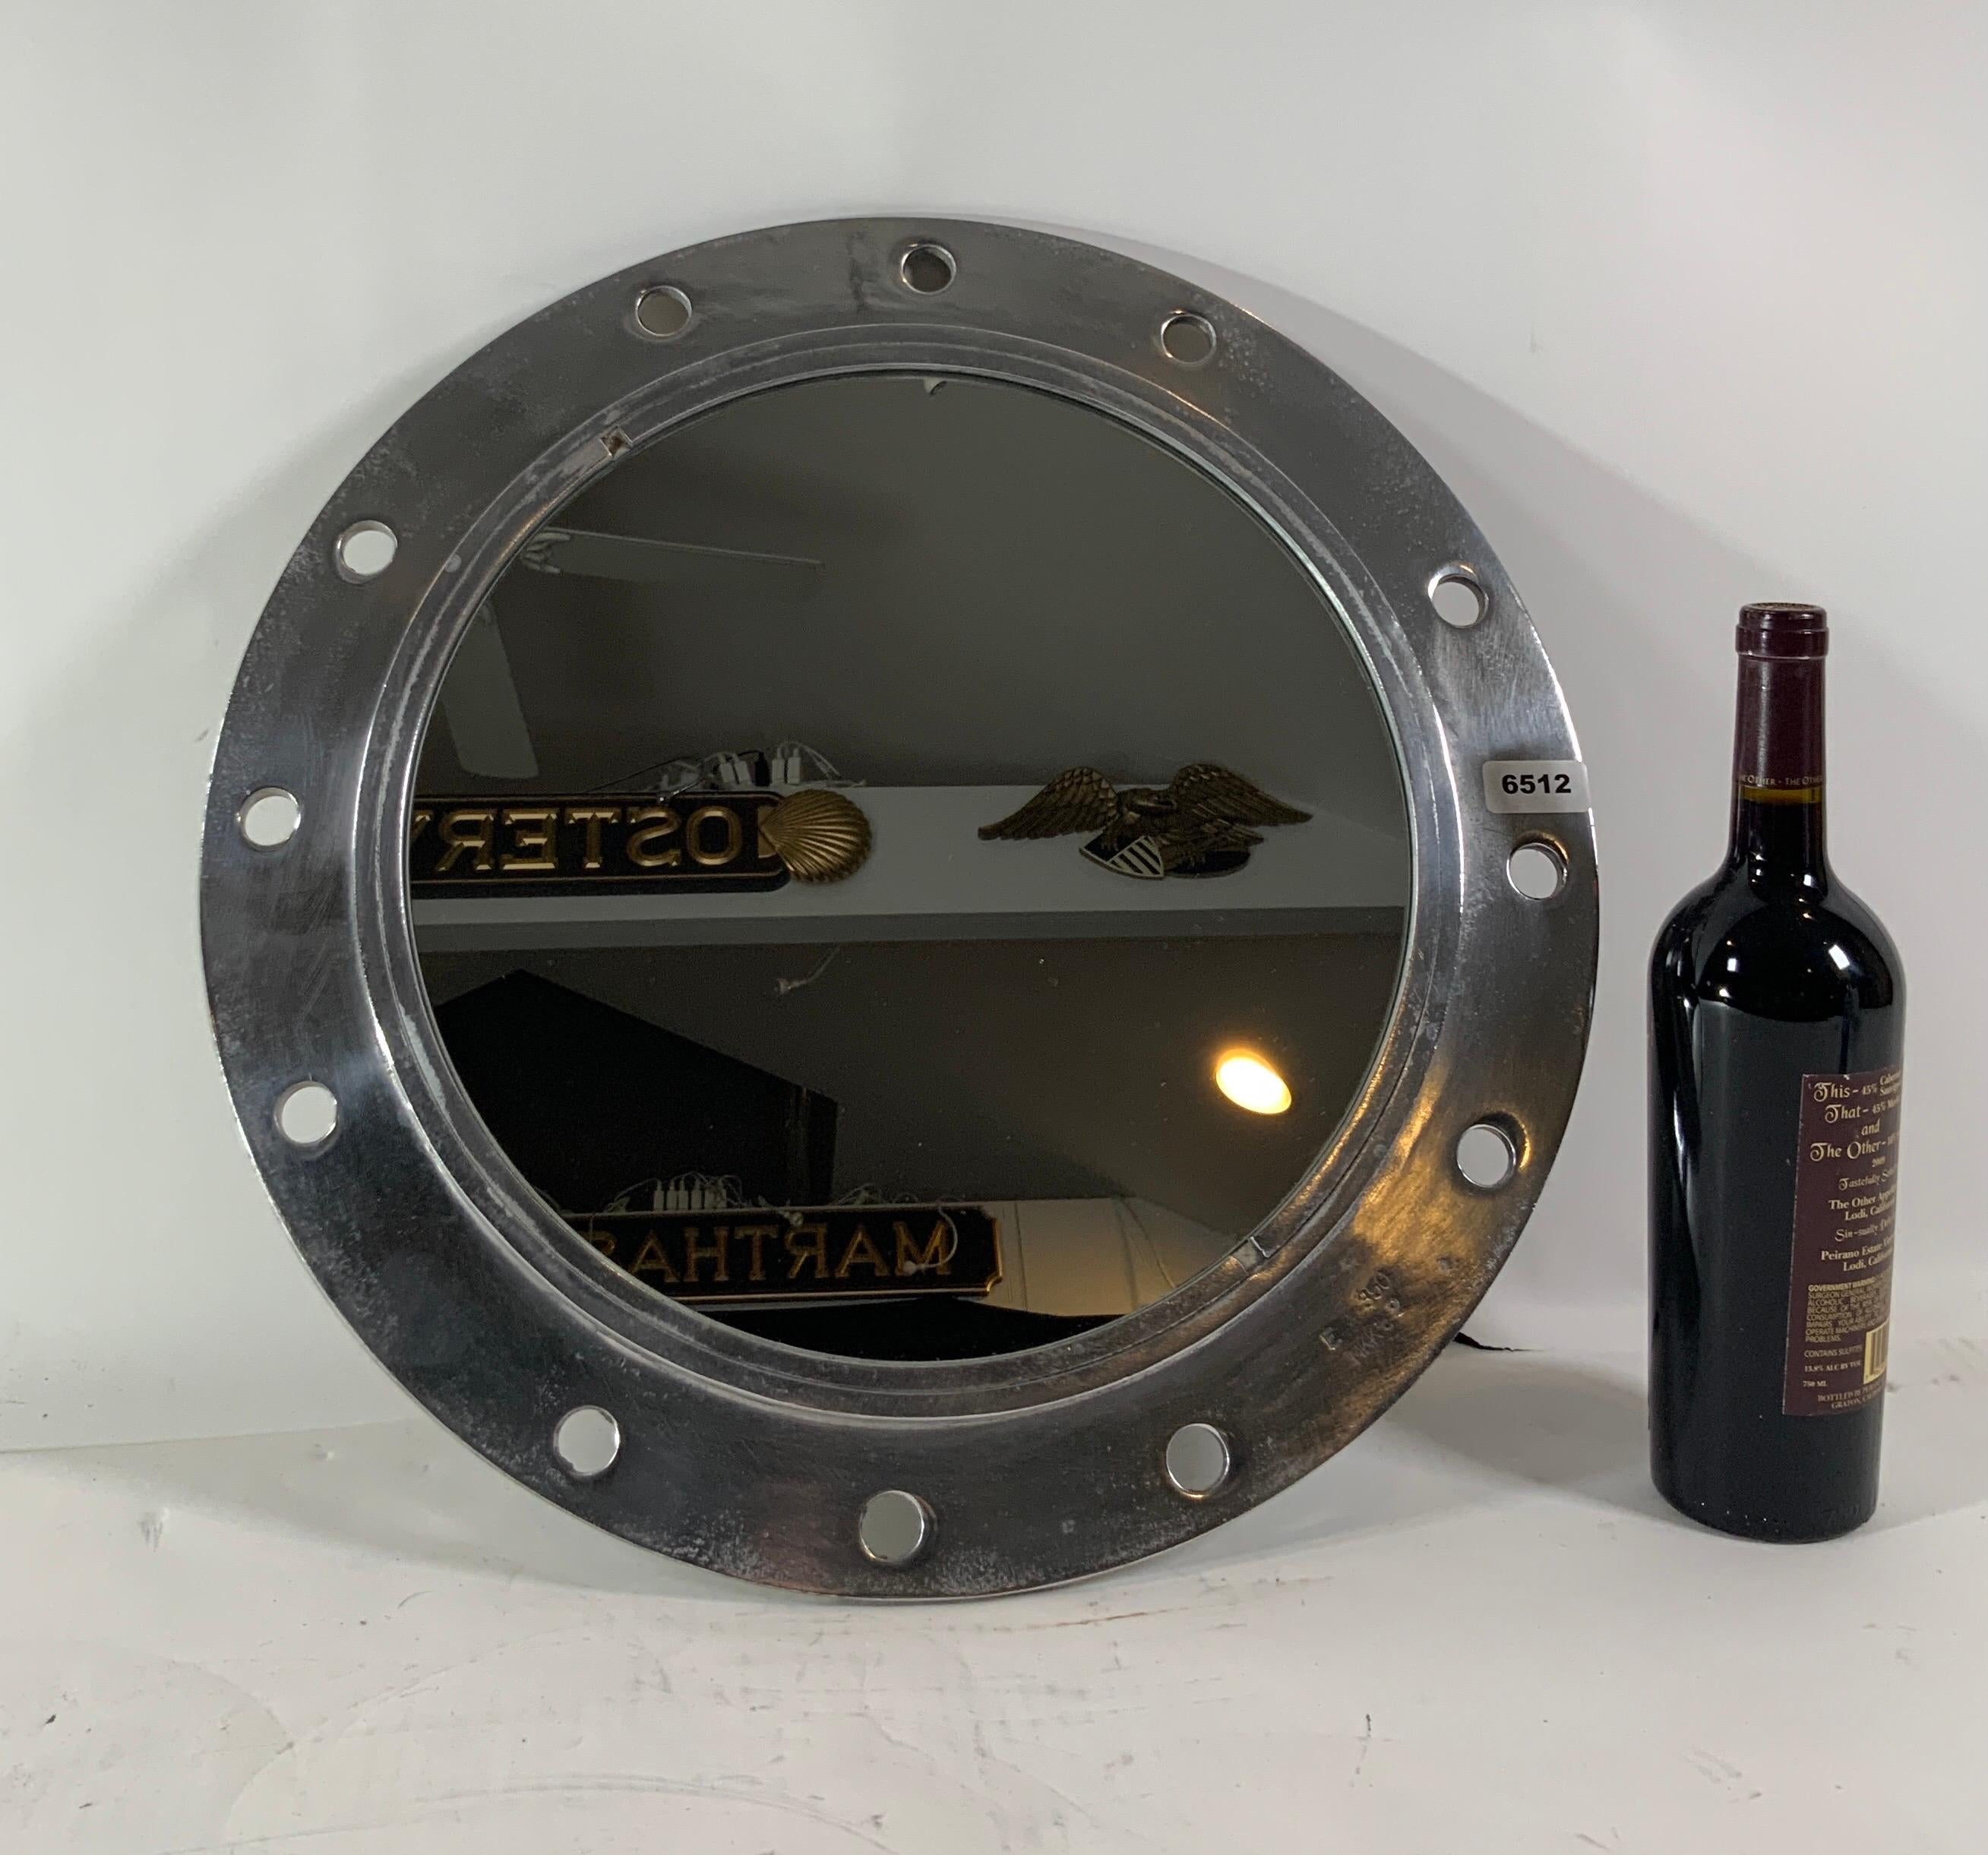 Aluminum ship's porthole with a polished finish and fitted with a glass mirror.

Overall dimensions: Diameter 19.